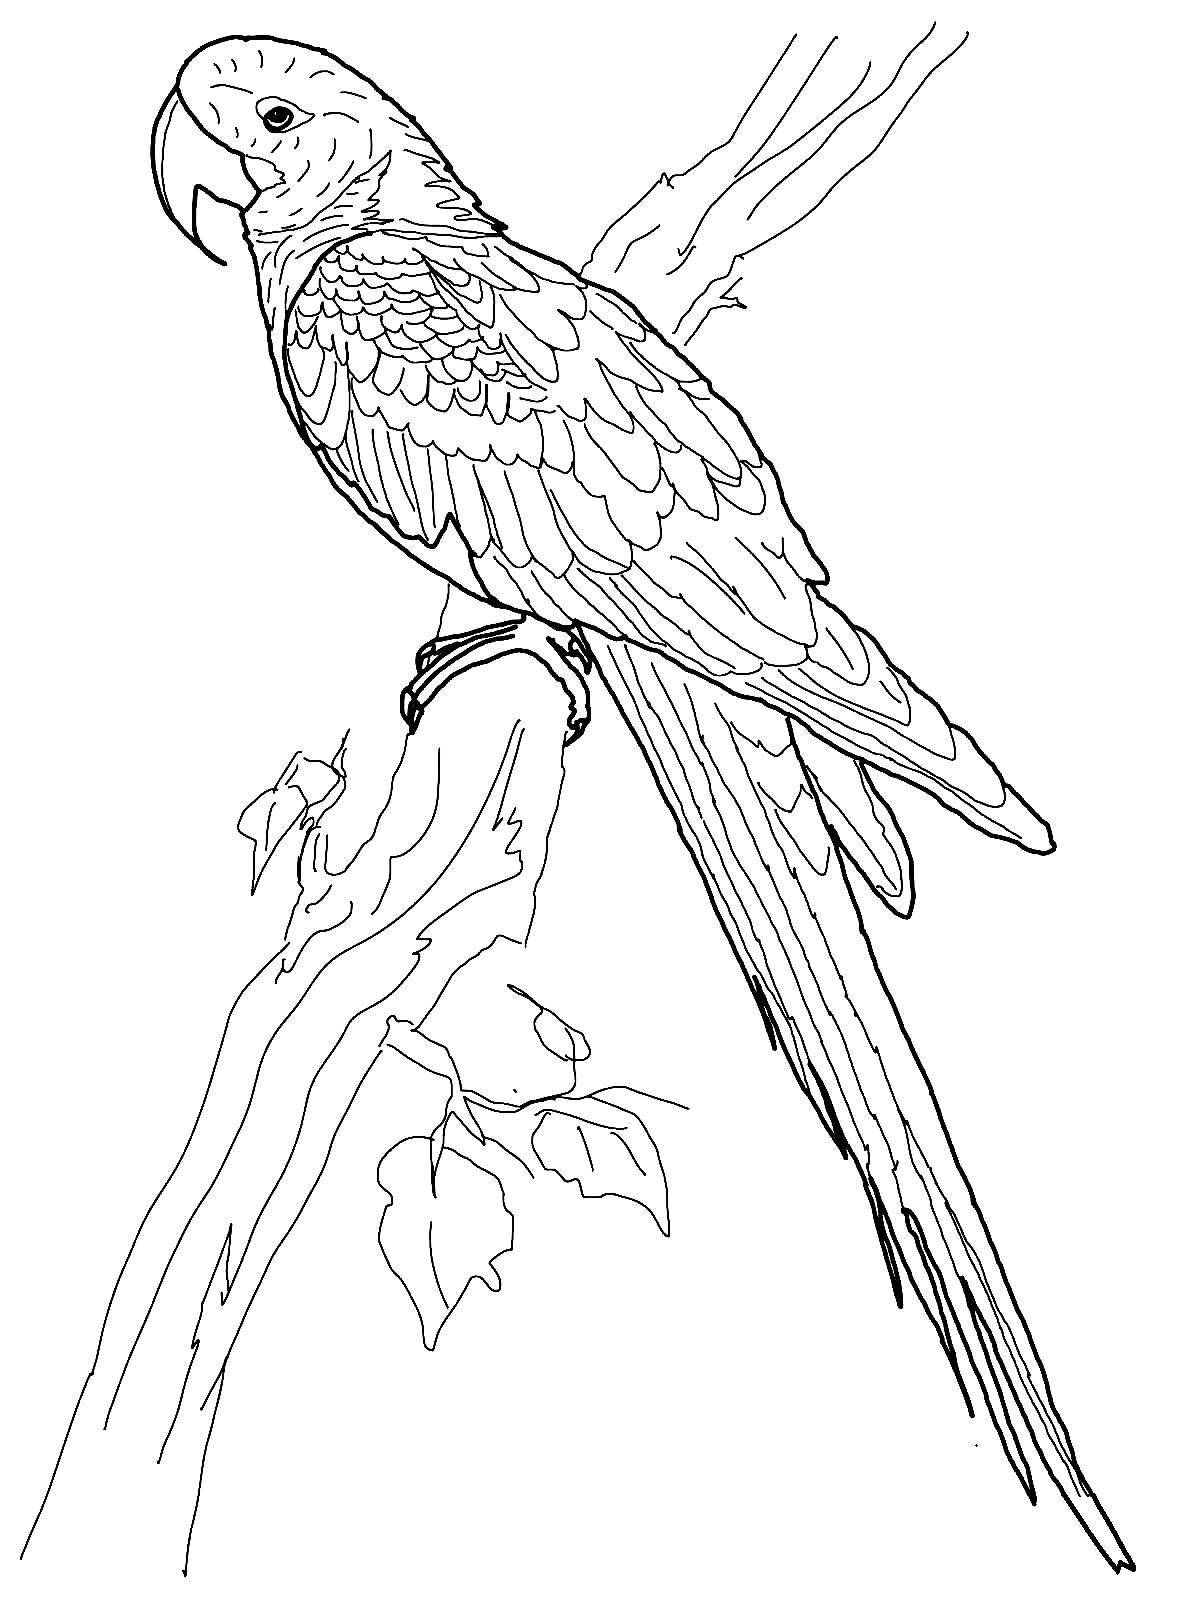 Coloring book nice macaw parrot